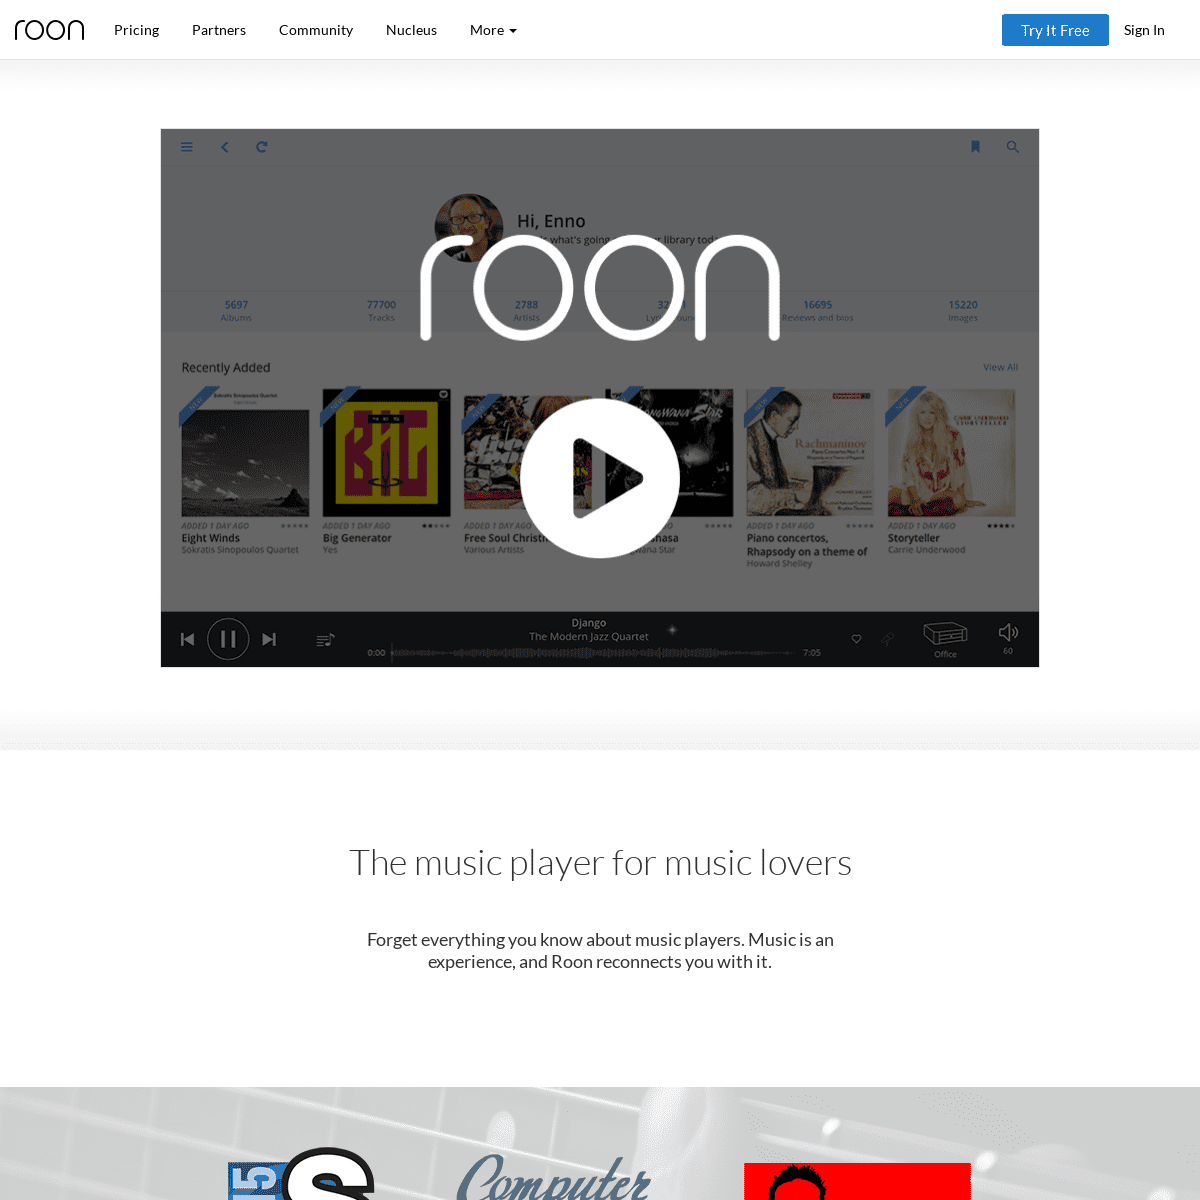 A complete backup of roonlabs.com